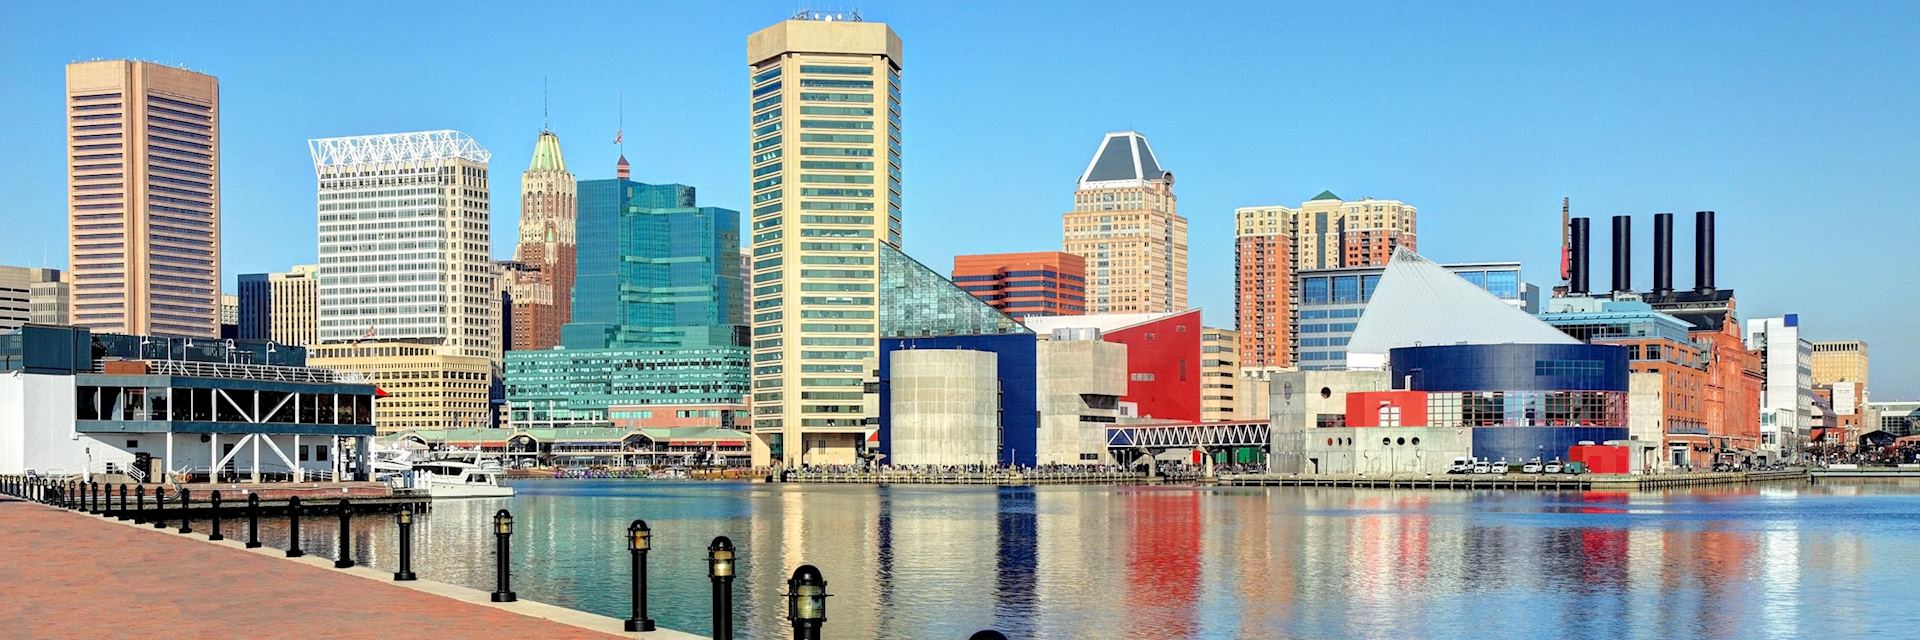 Baltimore's inner harbour, the USA